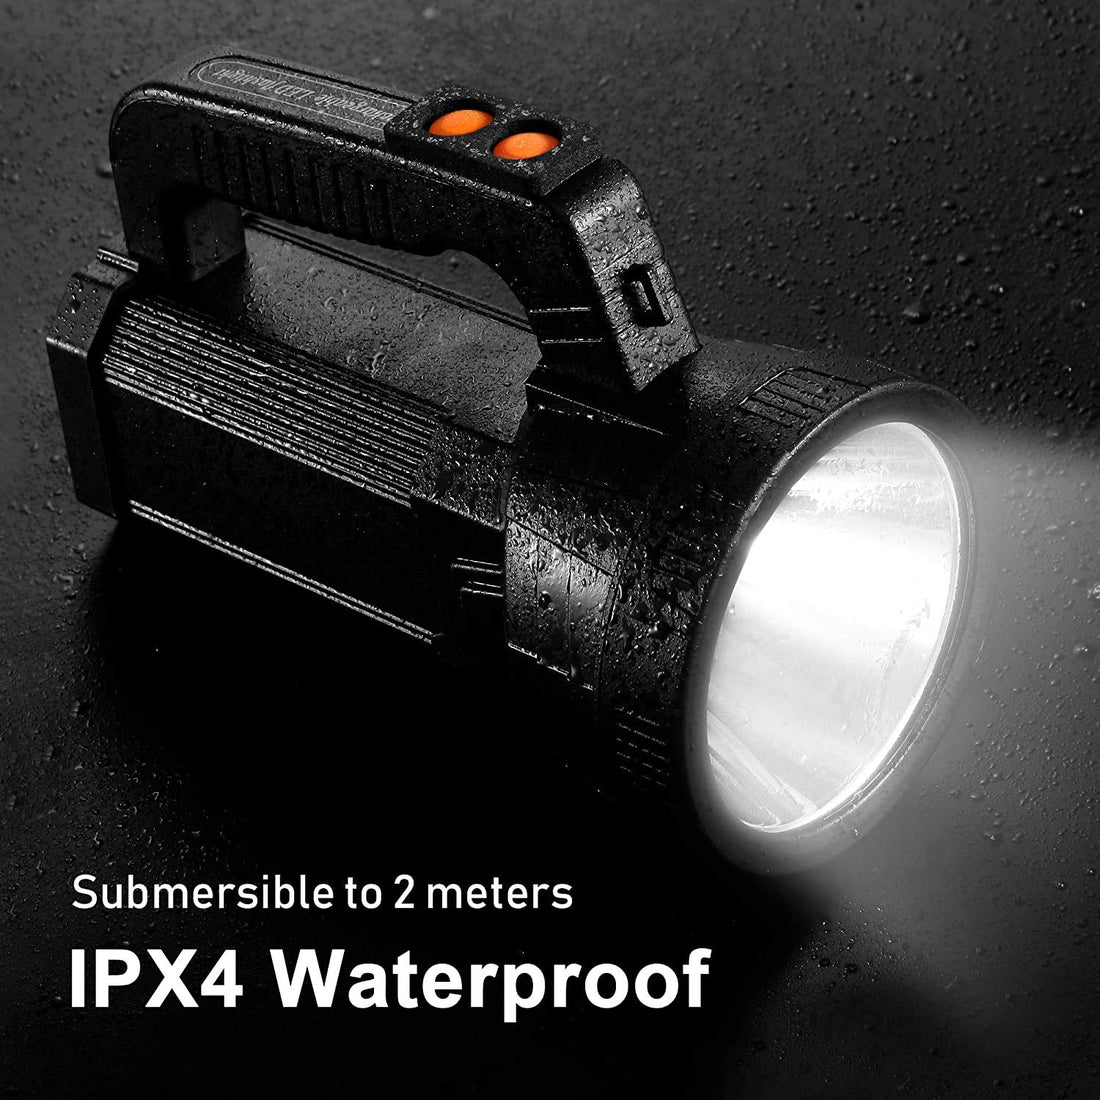 Rechargeable Spotlight Super Bright Led Tactical Flashlight 9600mah 6000 Lumens Spot Light Waterproof Handheld Searchlight Power Bank Function Torchlight 6 Lights Modes with Tripod (Black)